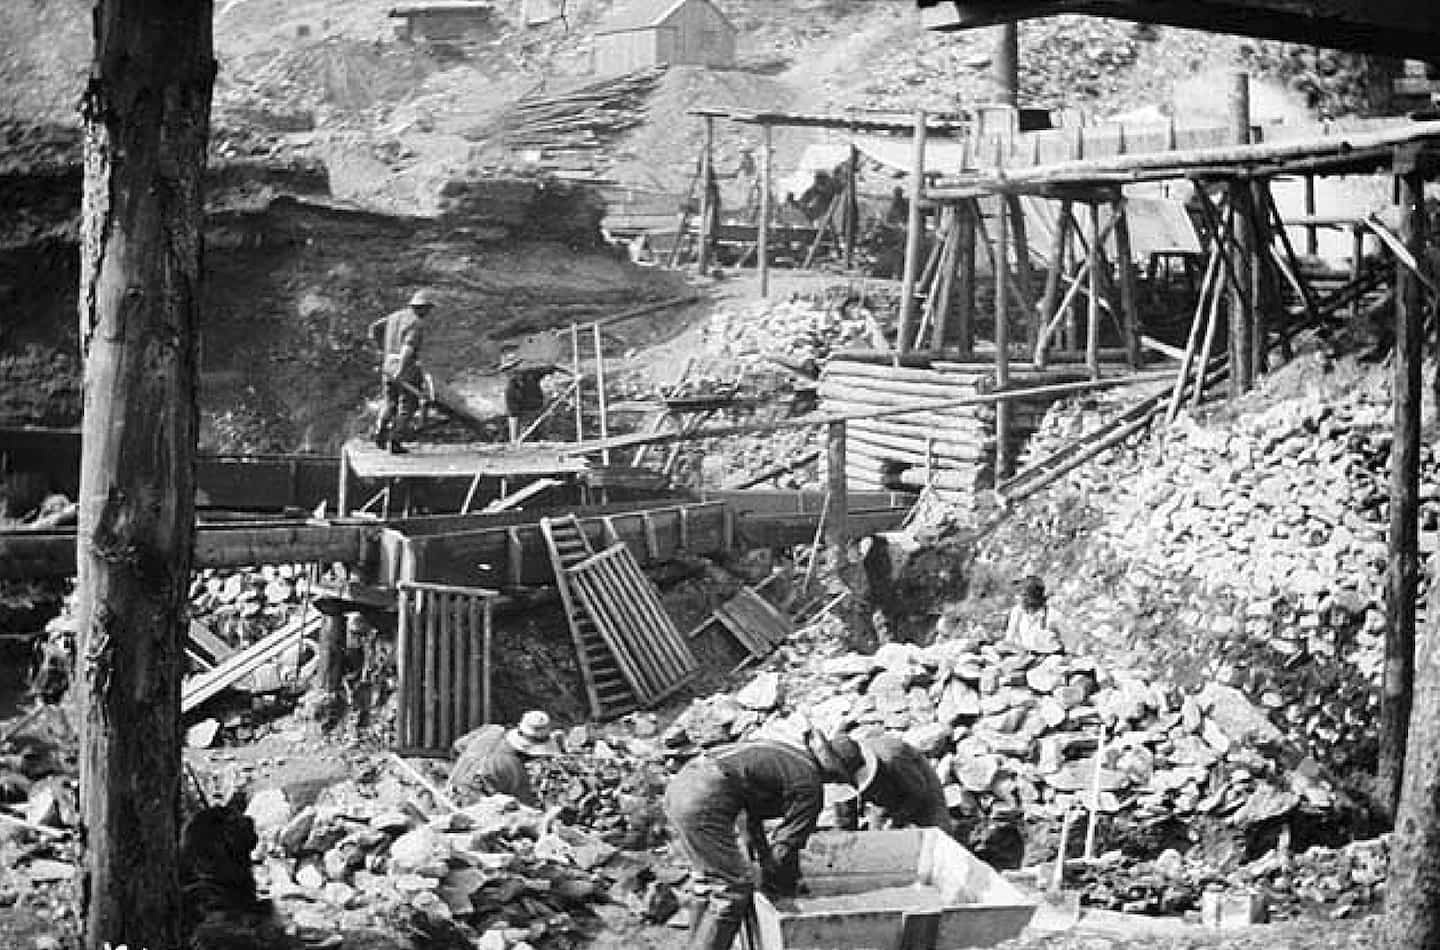 The epic of the Klondike gold rush: French Canadians also took part